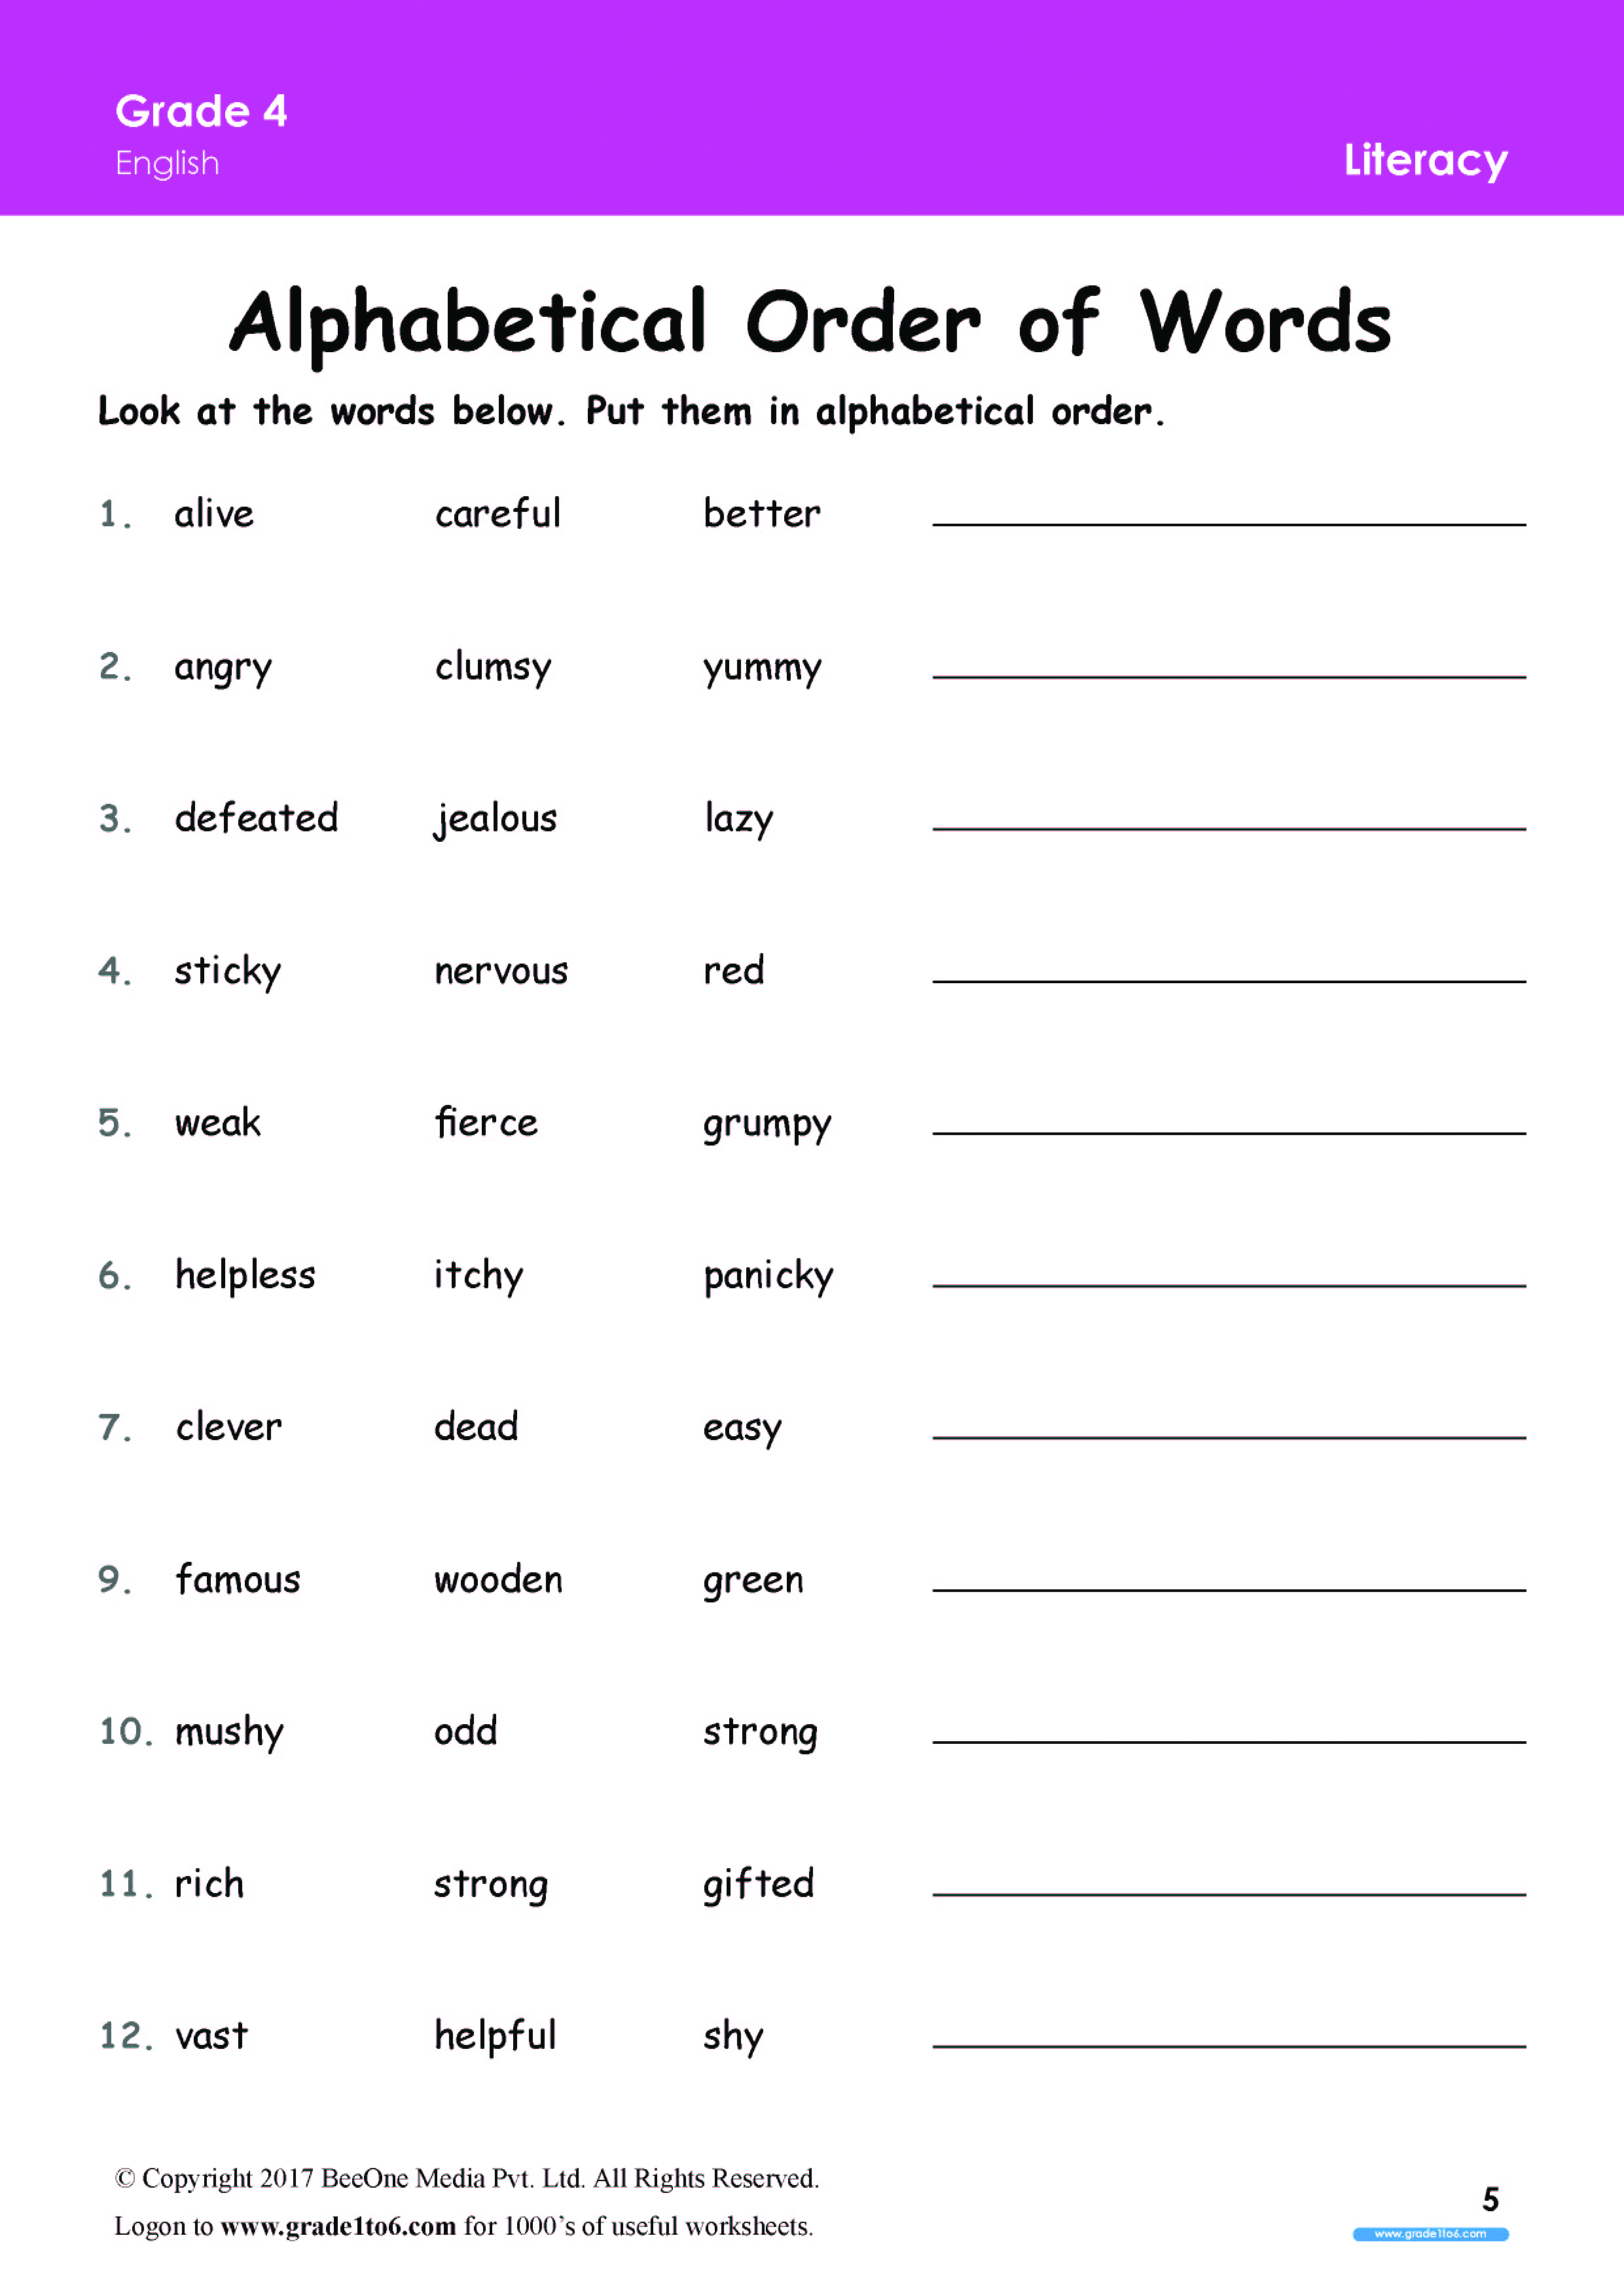 alphabetical-order-worksheets-with-answers